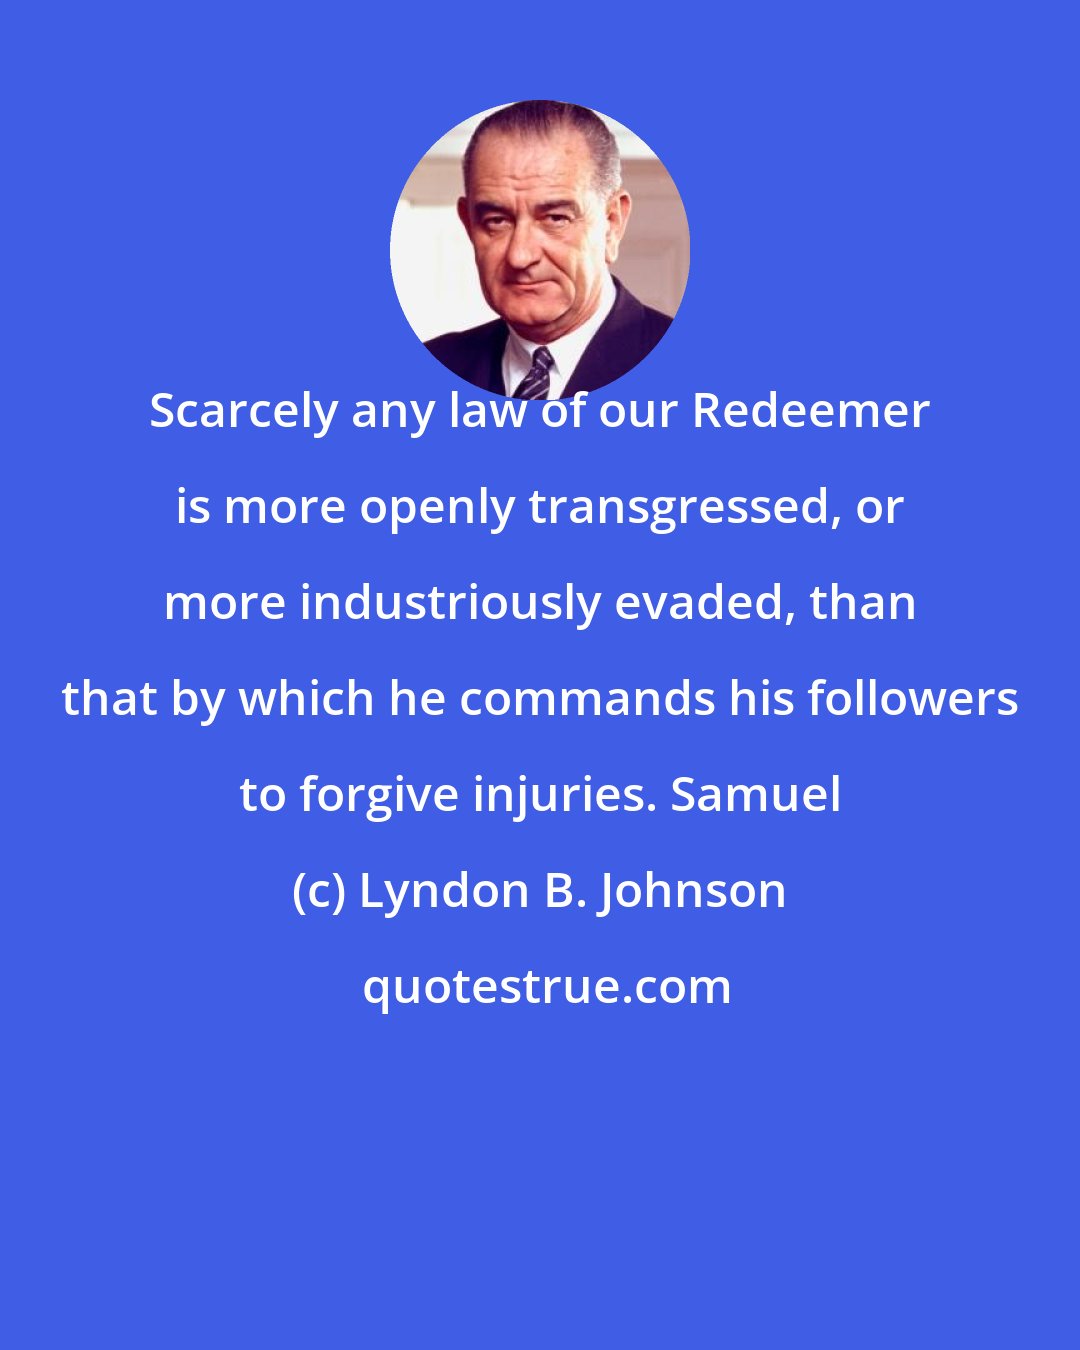 Lyndon B. Johnson: Scarcely any law of our Redeemer is more openly transgressed, or more industriously evaded, than that by which he commands his followers to forgive injuries. Samuel